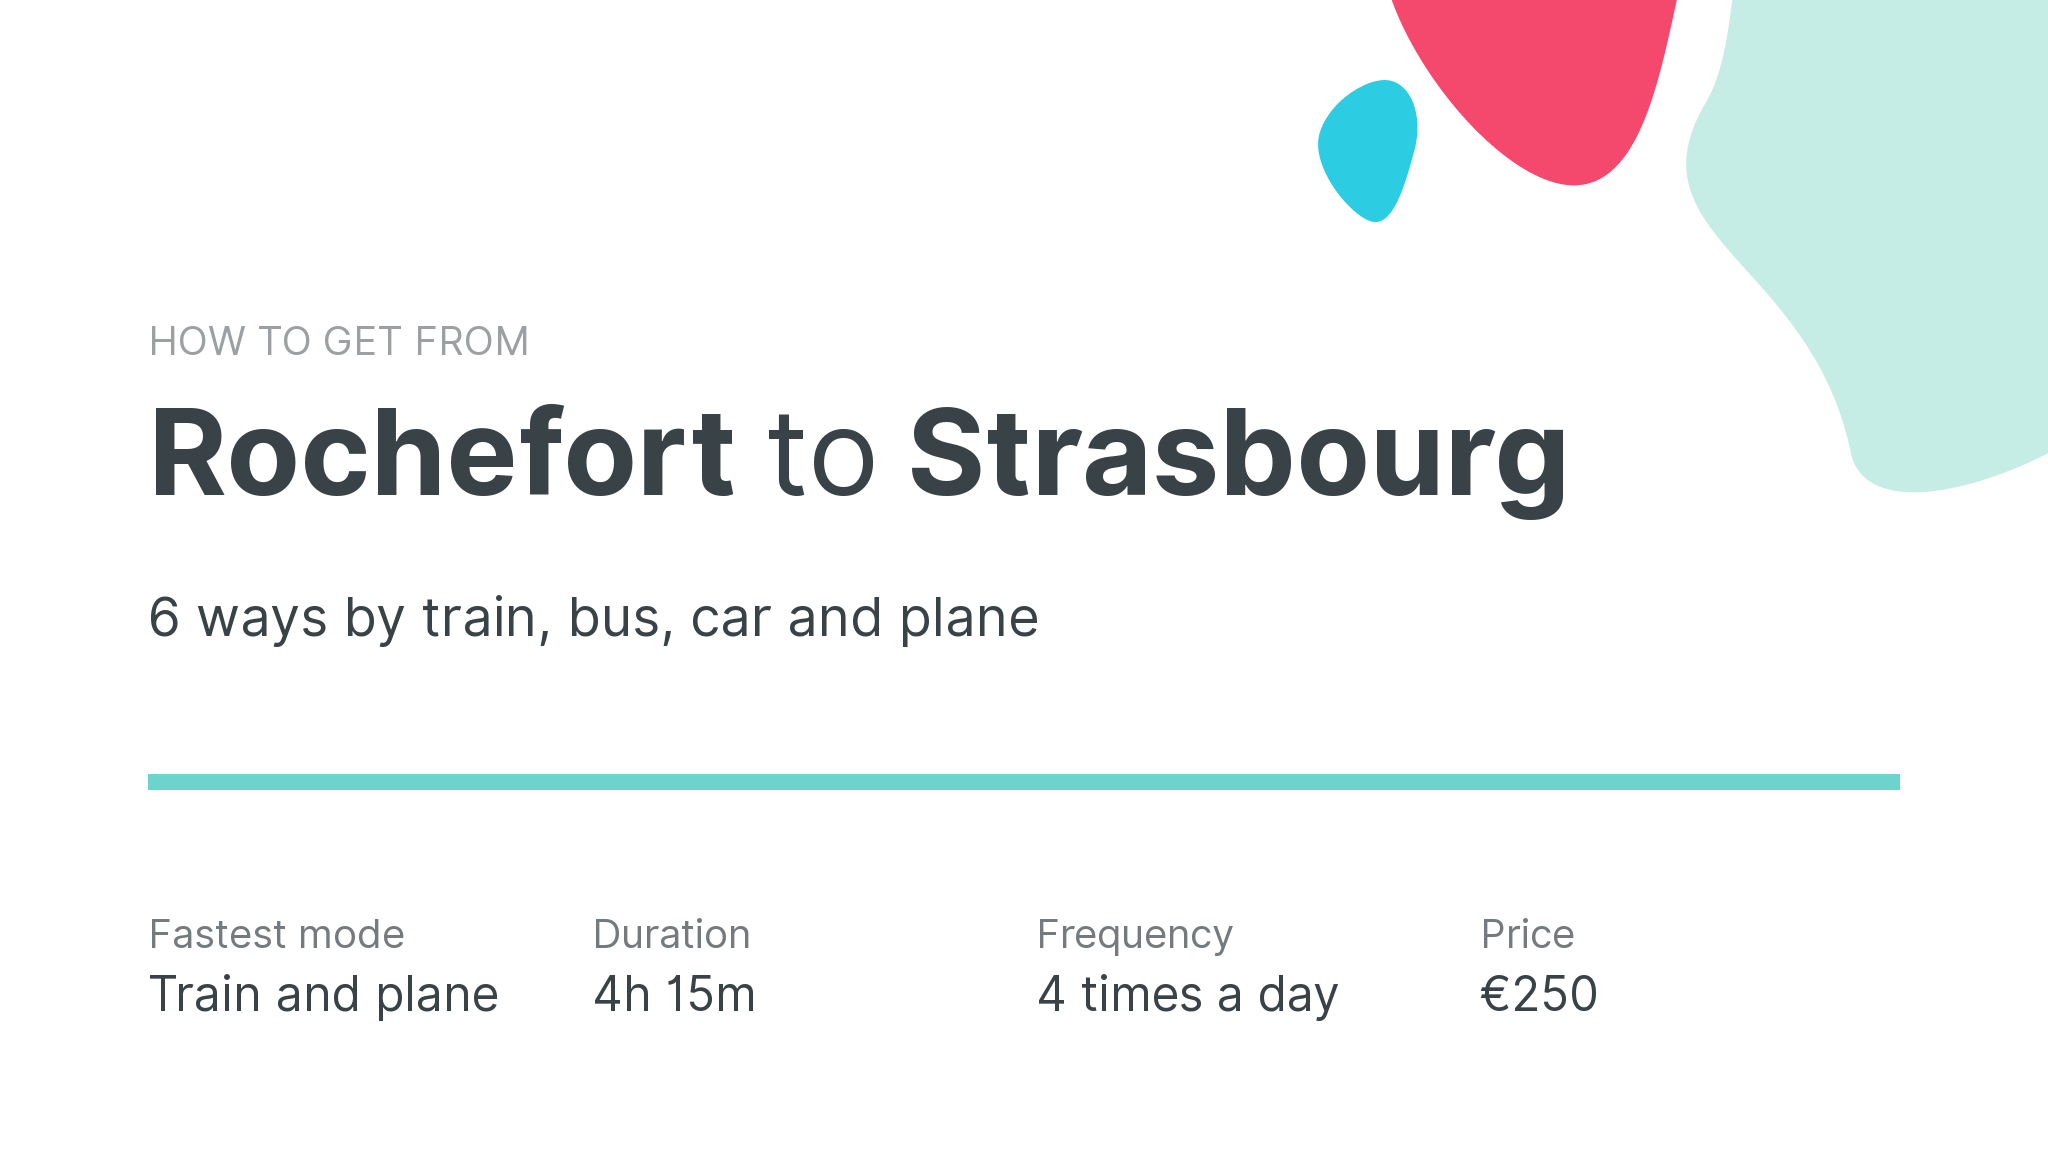 How do I get from Rochefort to Strasbourg